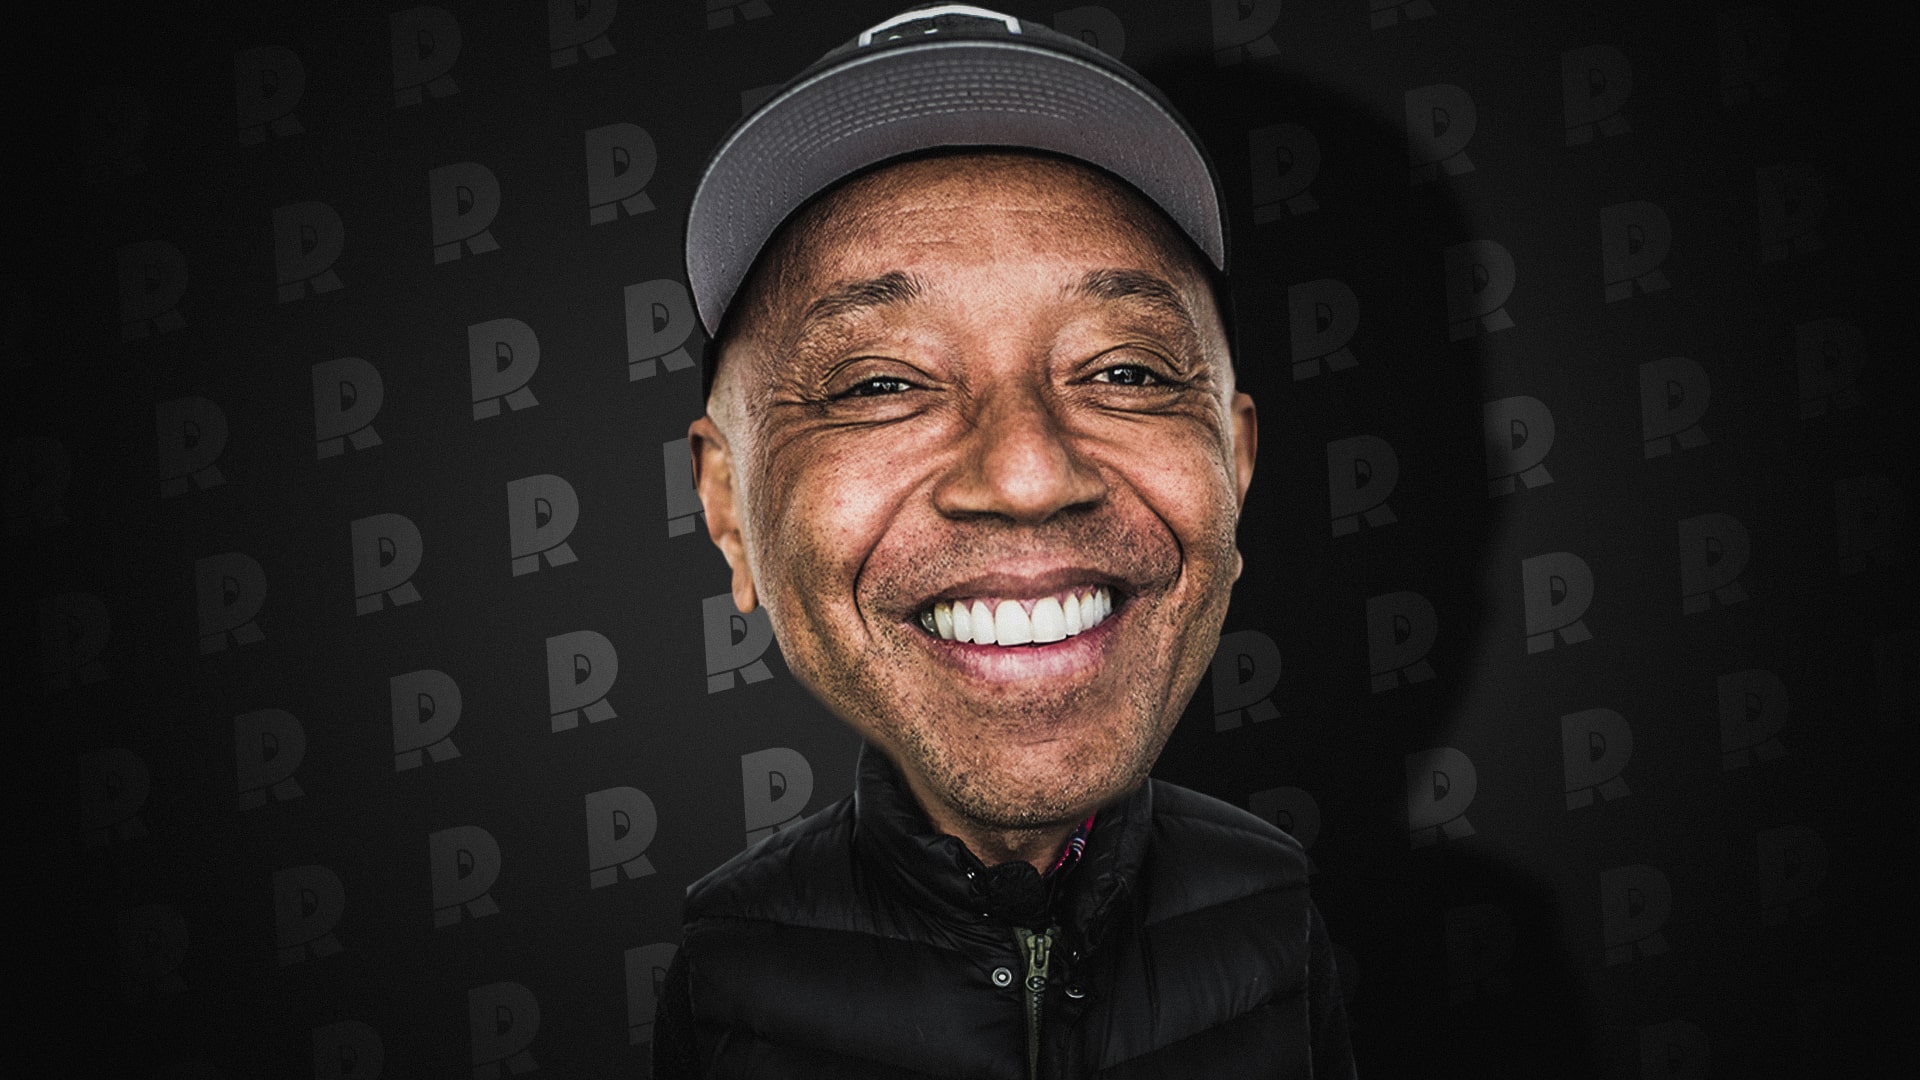 Russell Simmons Net worth $340 Million - Who Is the Richest Hip Hop Artist in the World of 2022?